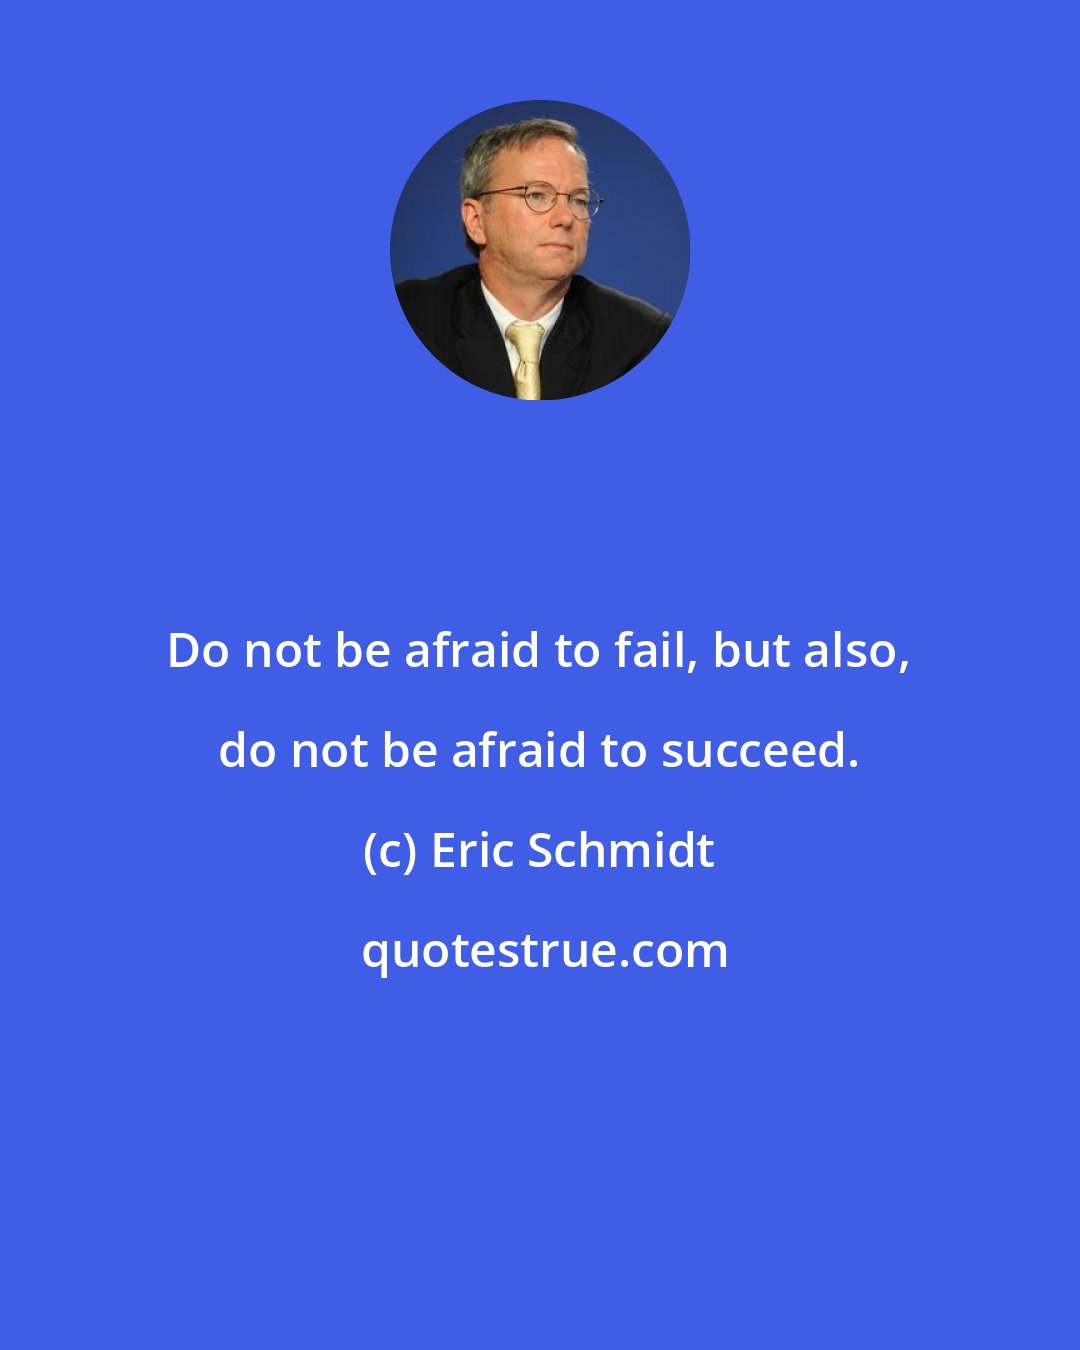 Eric Schmidt: Do not be afraid to fail, but also, do not be afraid to succeed.